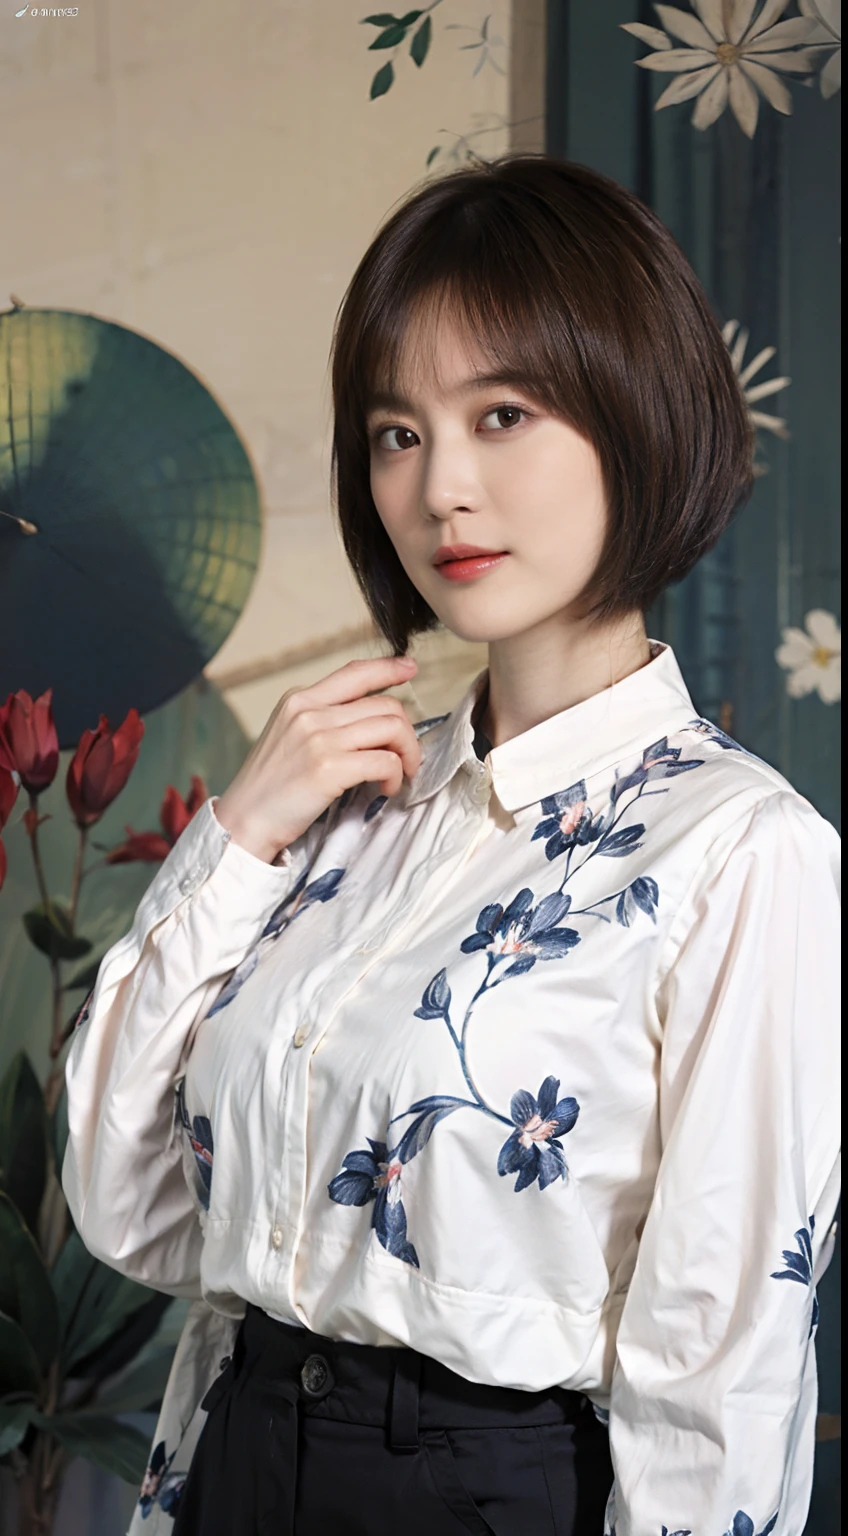 32
(Shorthair:1.23), (a 20 yo woman), (A hyper-realistic), (Masterpiece), (8KUHD), Long sleeve shirt with floral pattern, breeches, (breast:1.23), serene expressions